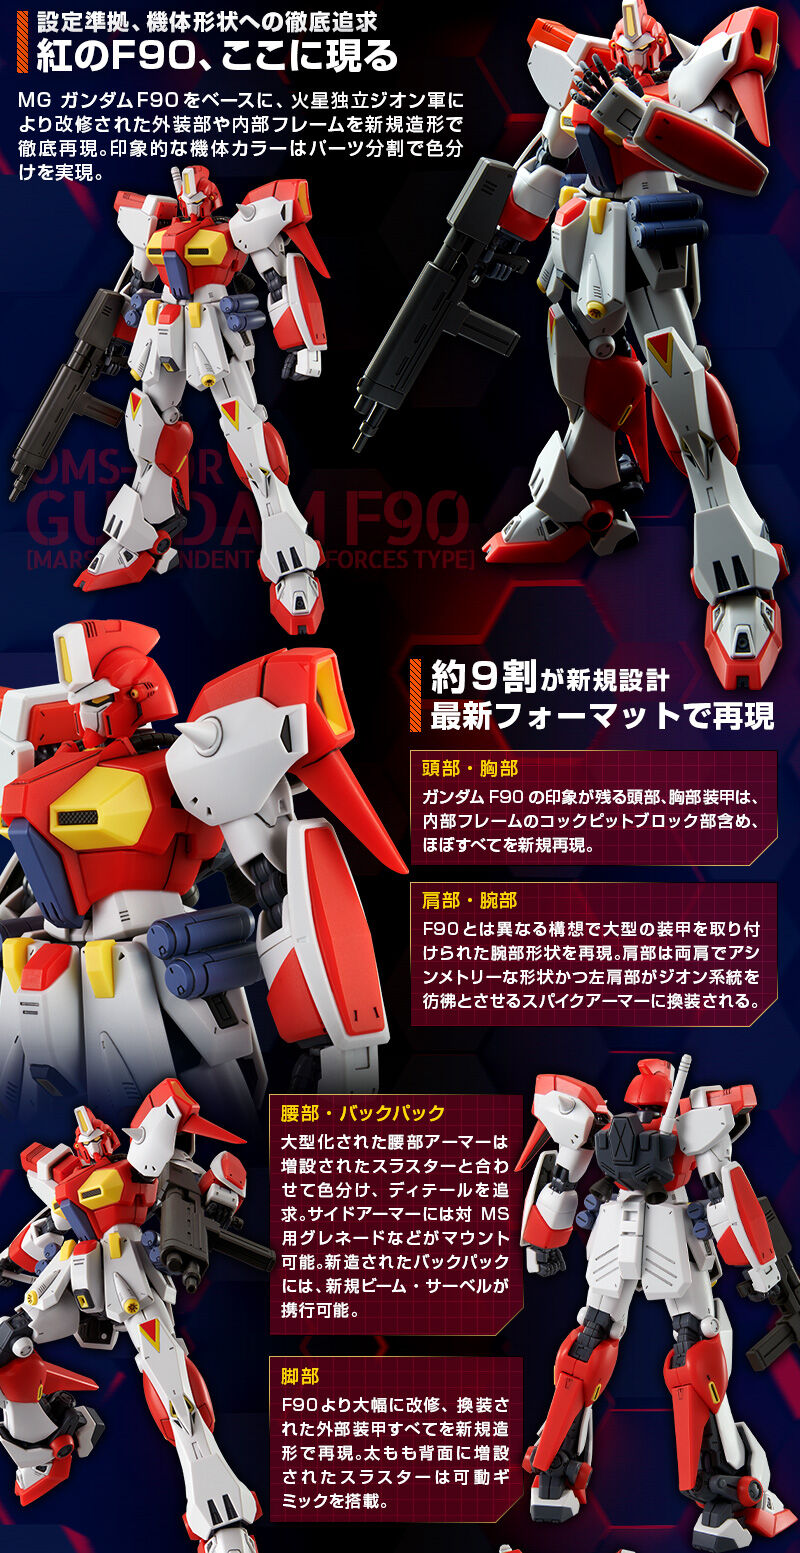 MG 1/100 GUNDAM F90 [MARS INDEPENDENT ZEON FORCES TYPE 